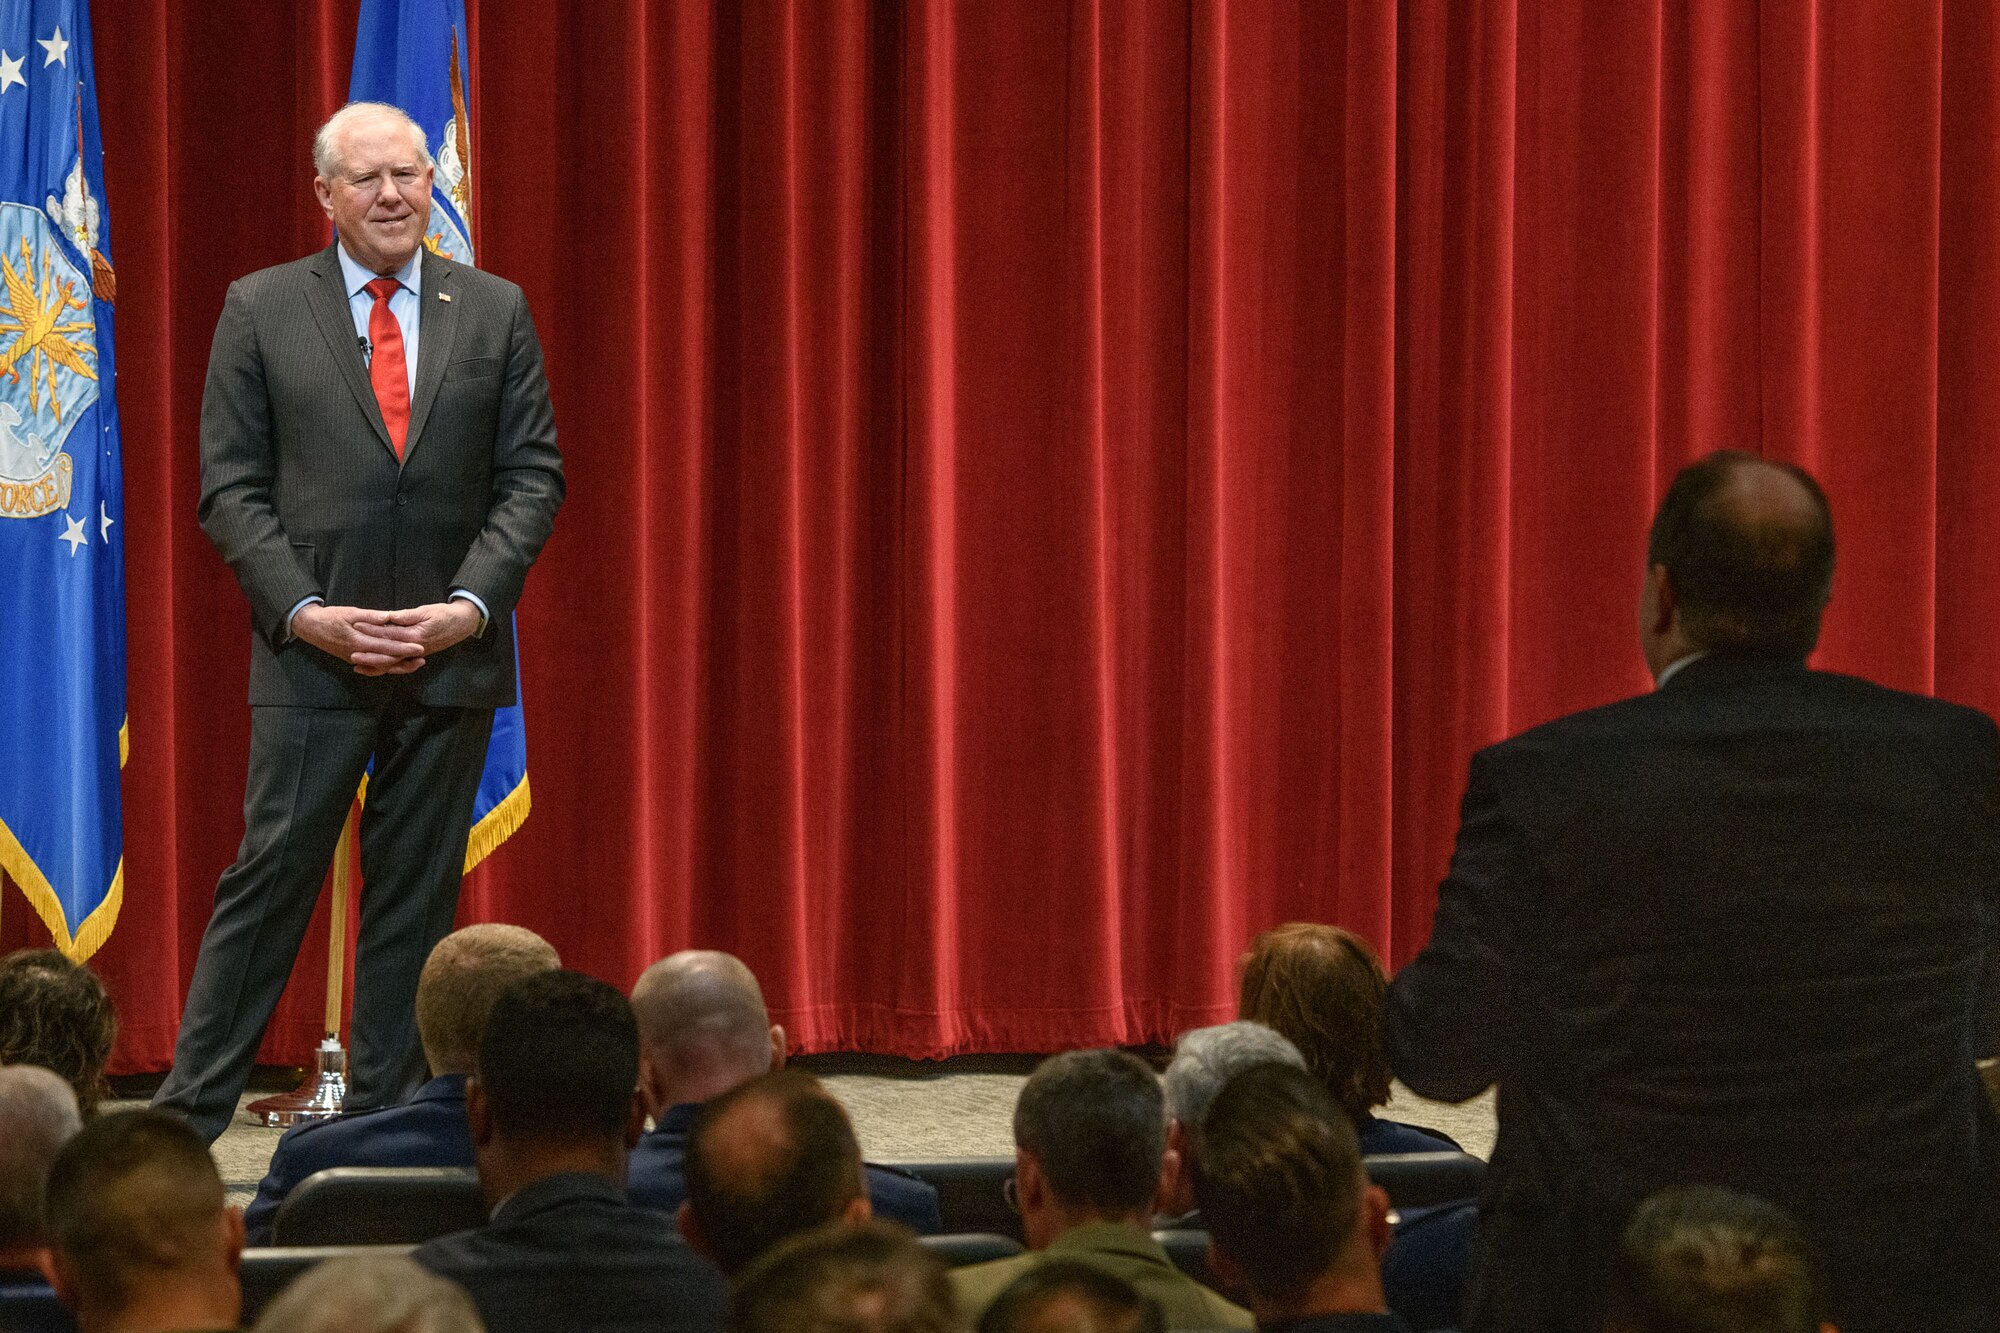 U.S. Air Force Secretary Frank Kendall takes a question from a guest attending the National Security Forum at Air War College